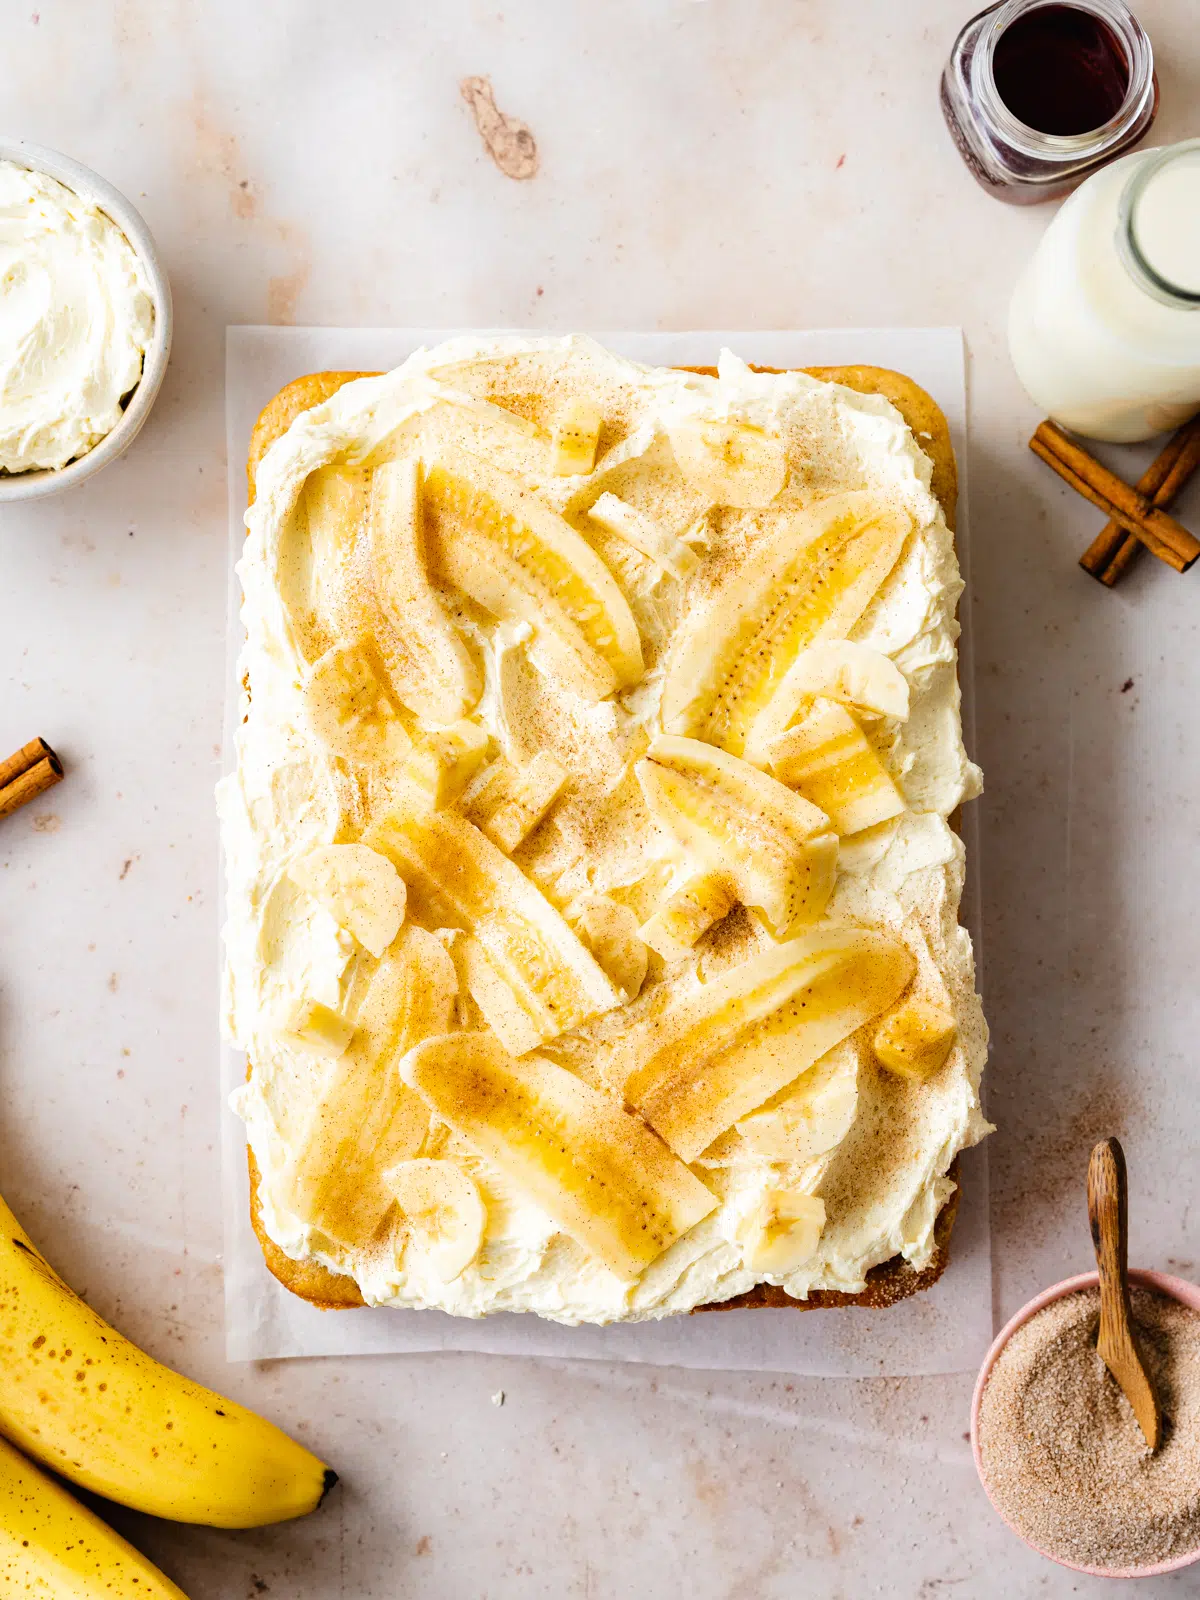 banana sheet cake with cream cheese frosting and banana slices on a peach surface.